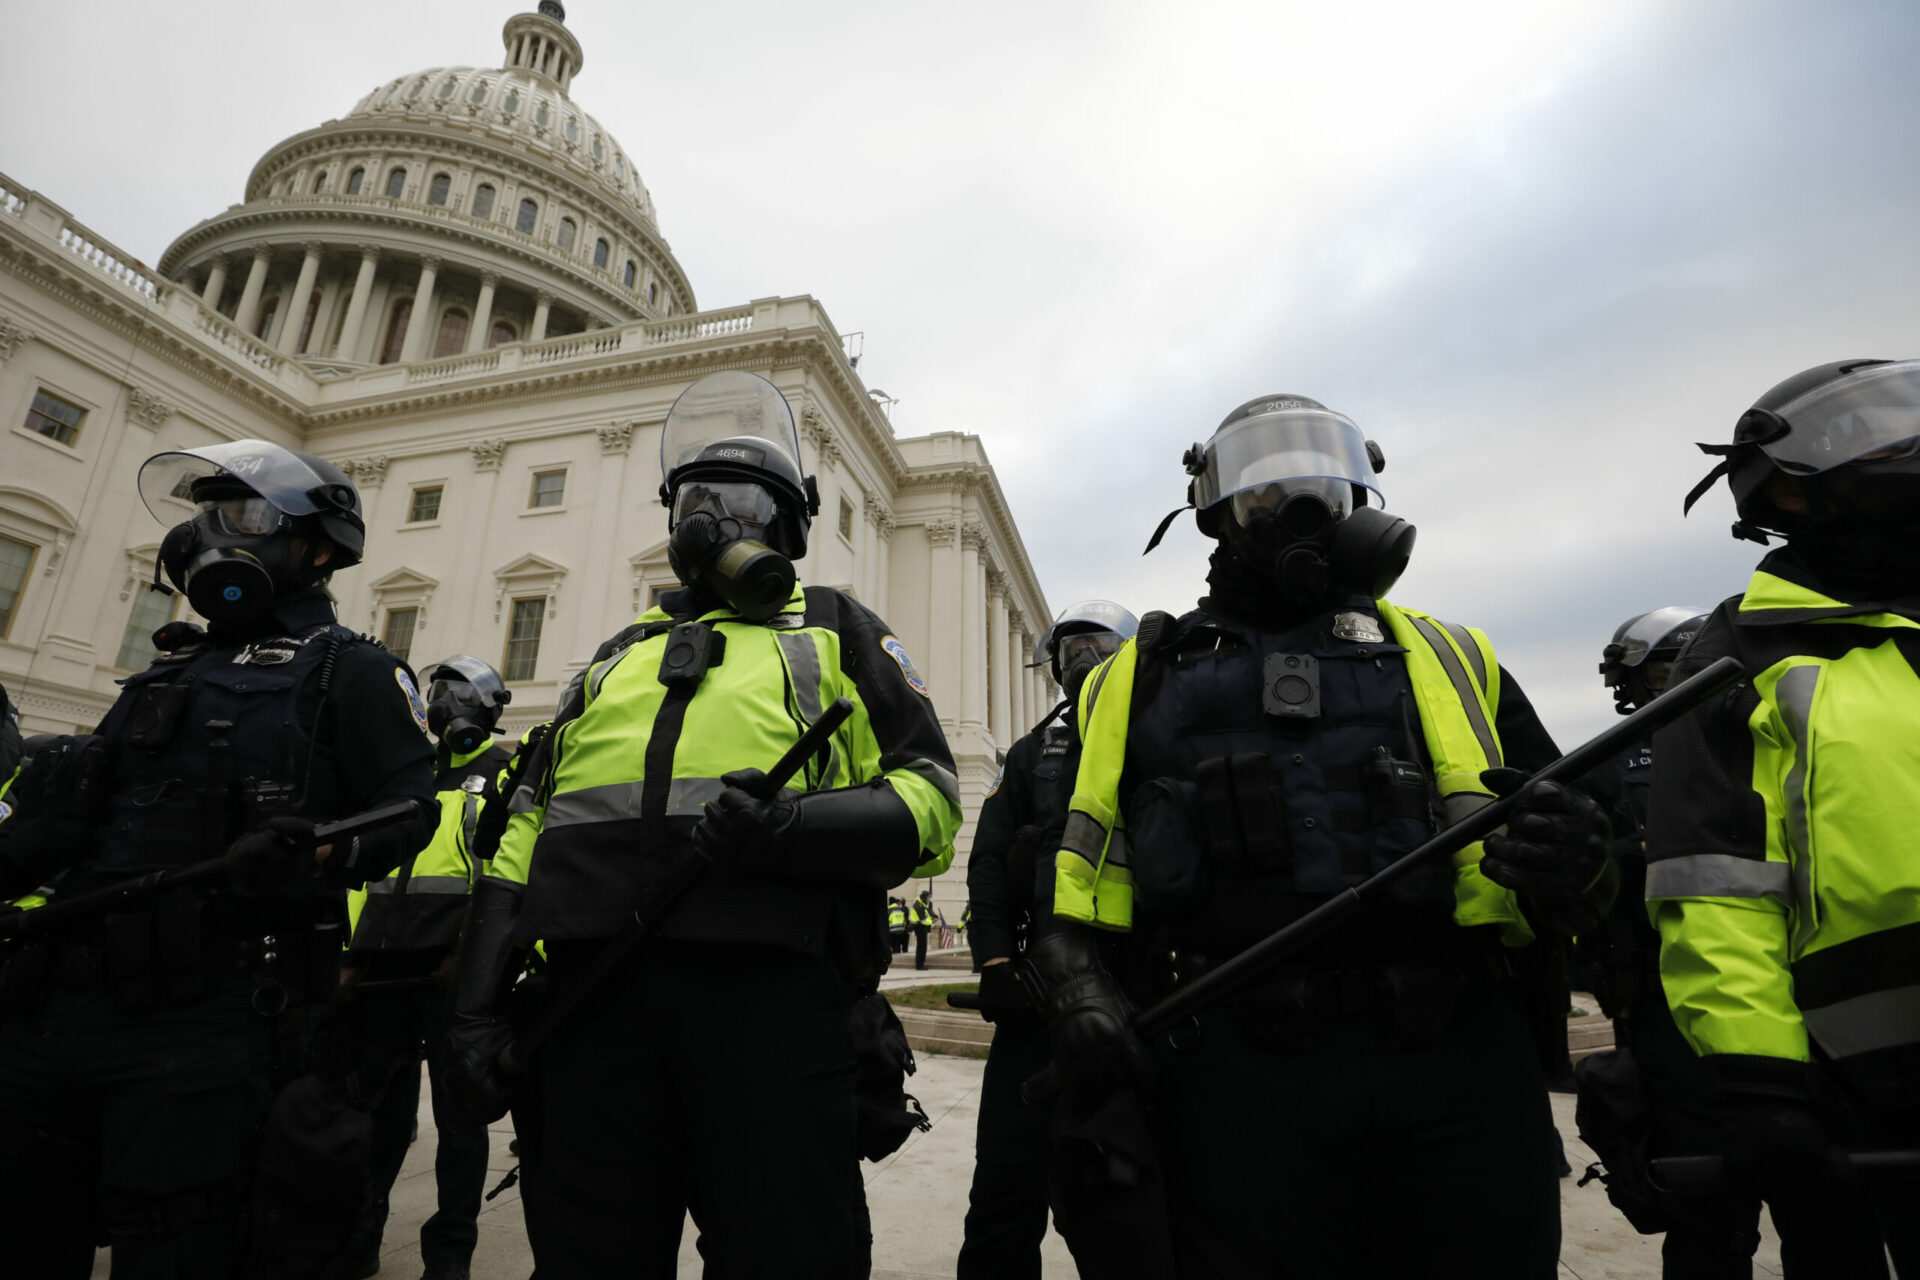 New York Times retracts claim that Trump supporter killed Capitol officer with fire extinguisher